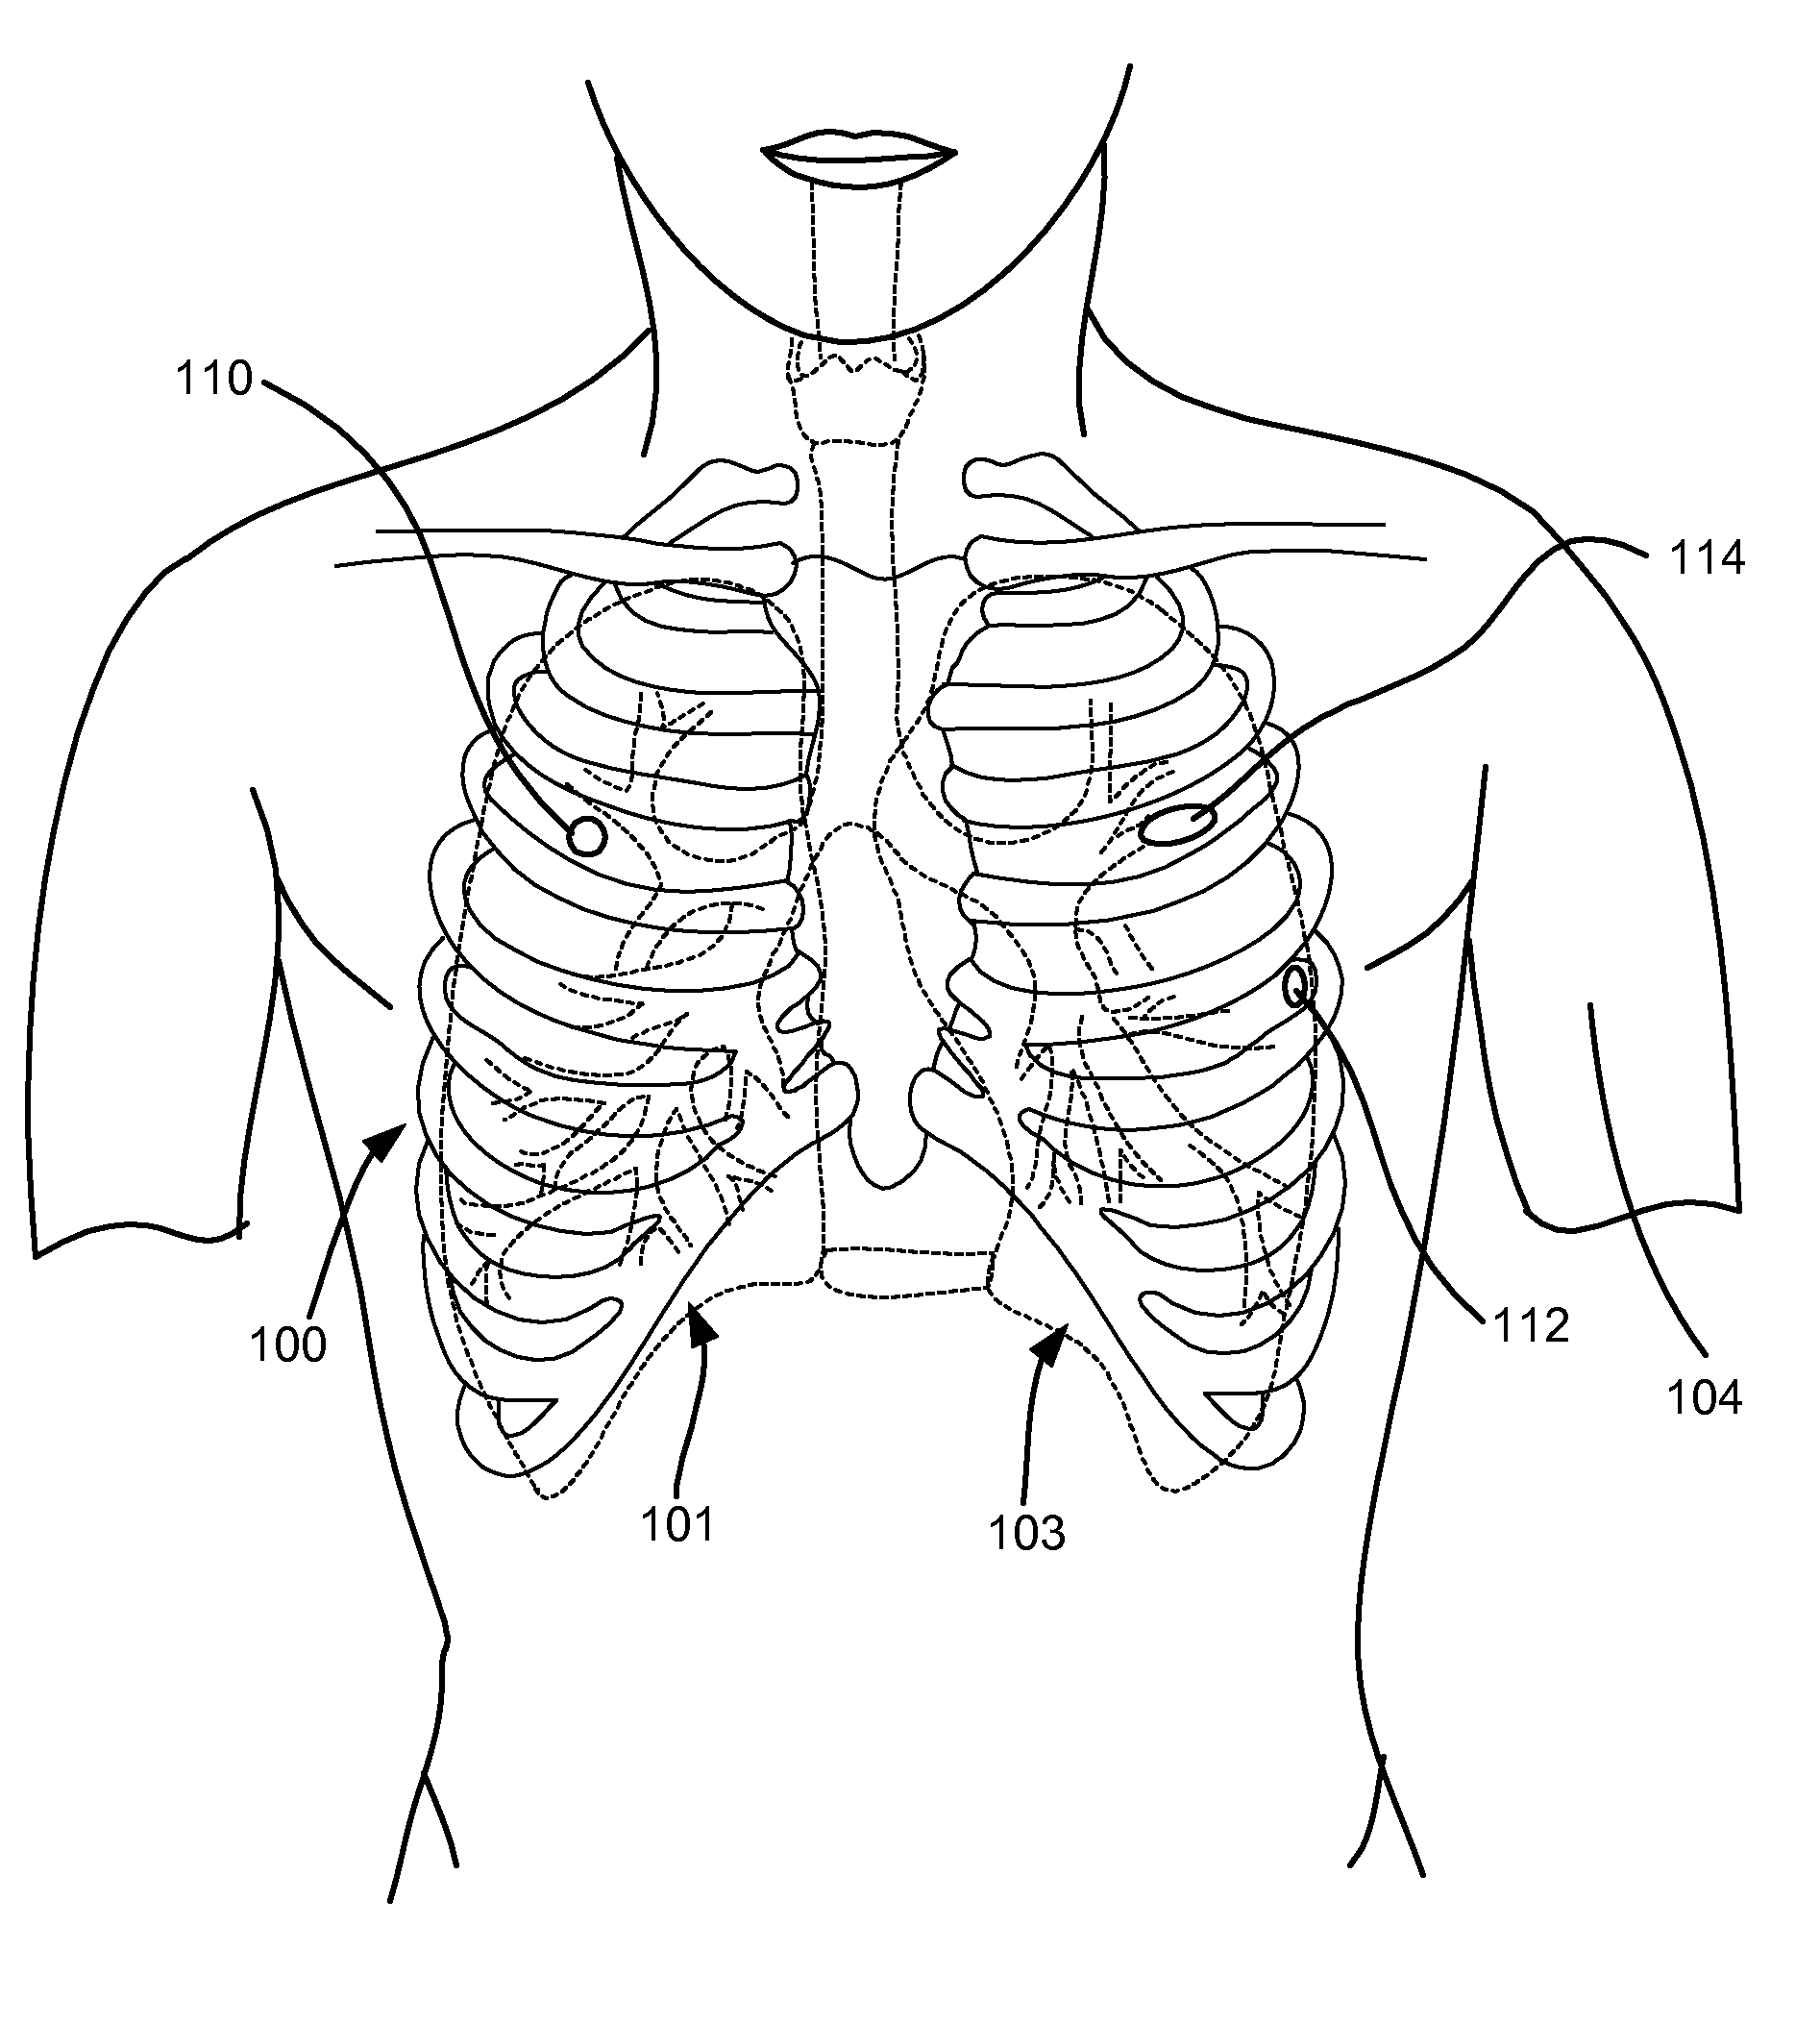 Surgical instruments for creating a pneumostoma and treating chronic obstructive pulmonary disease